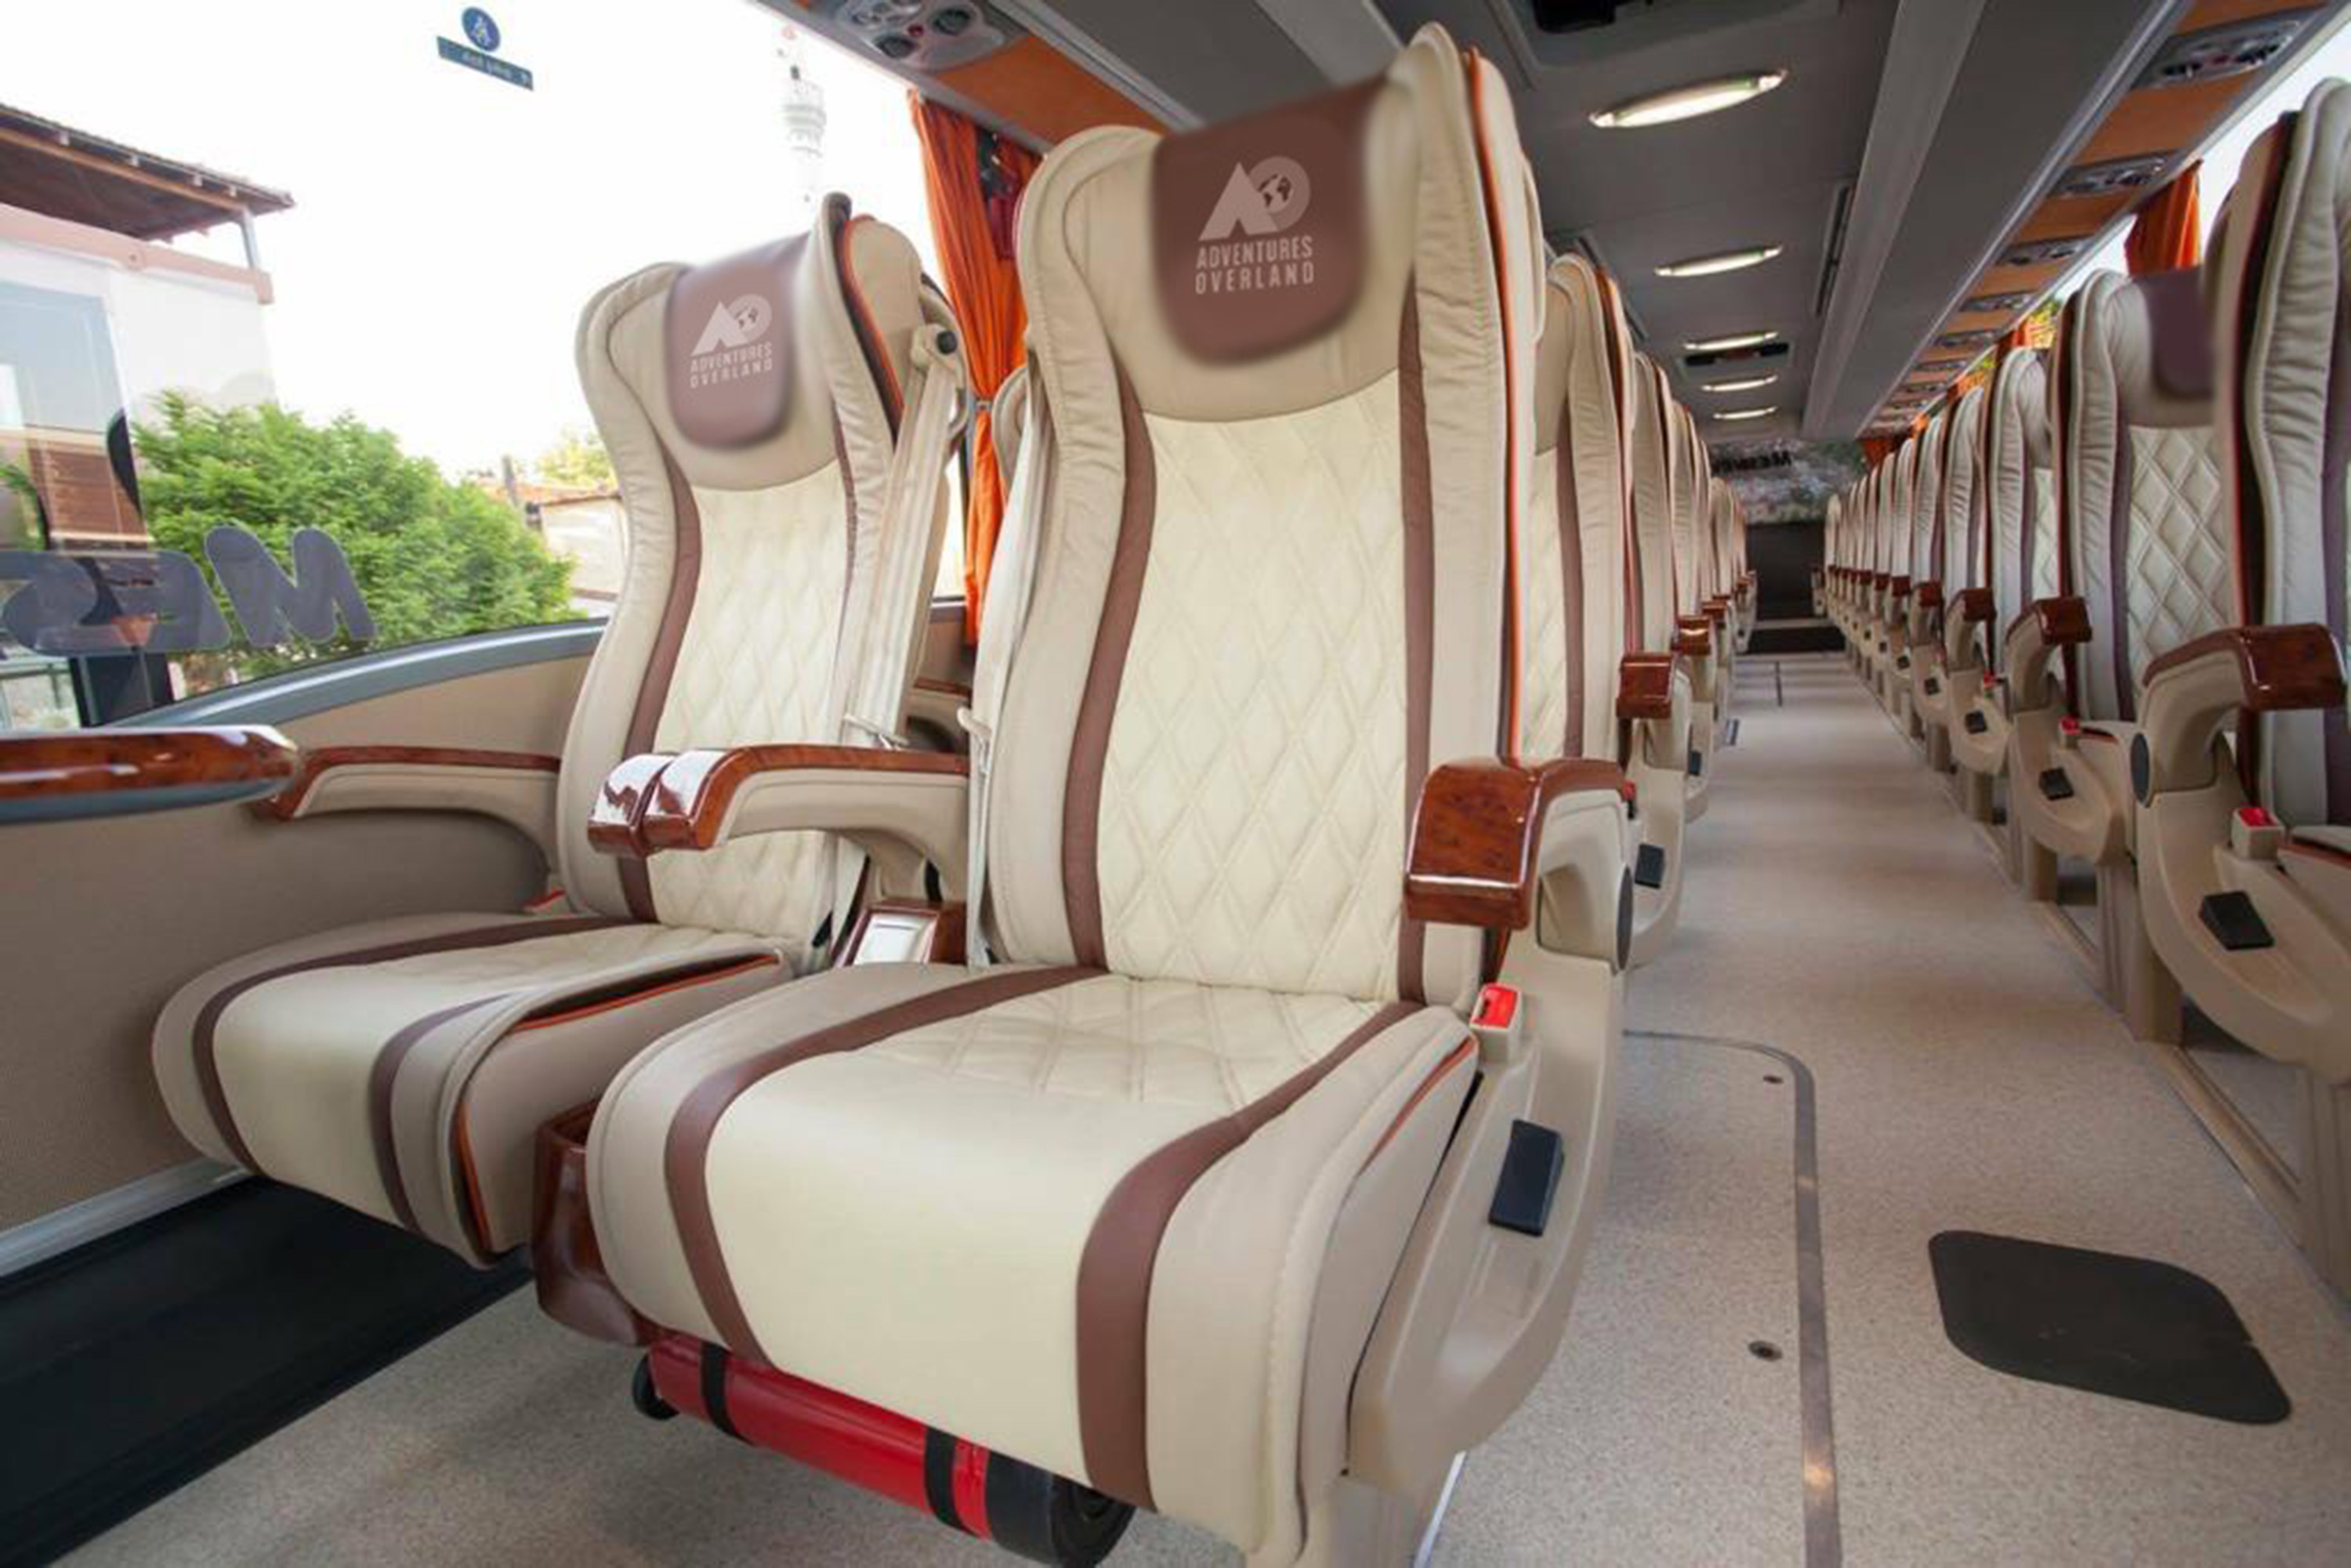 Artist impression of the interior of the Bus to London.